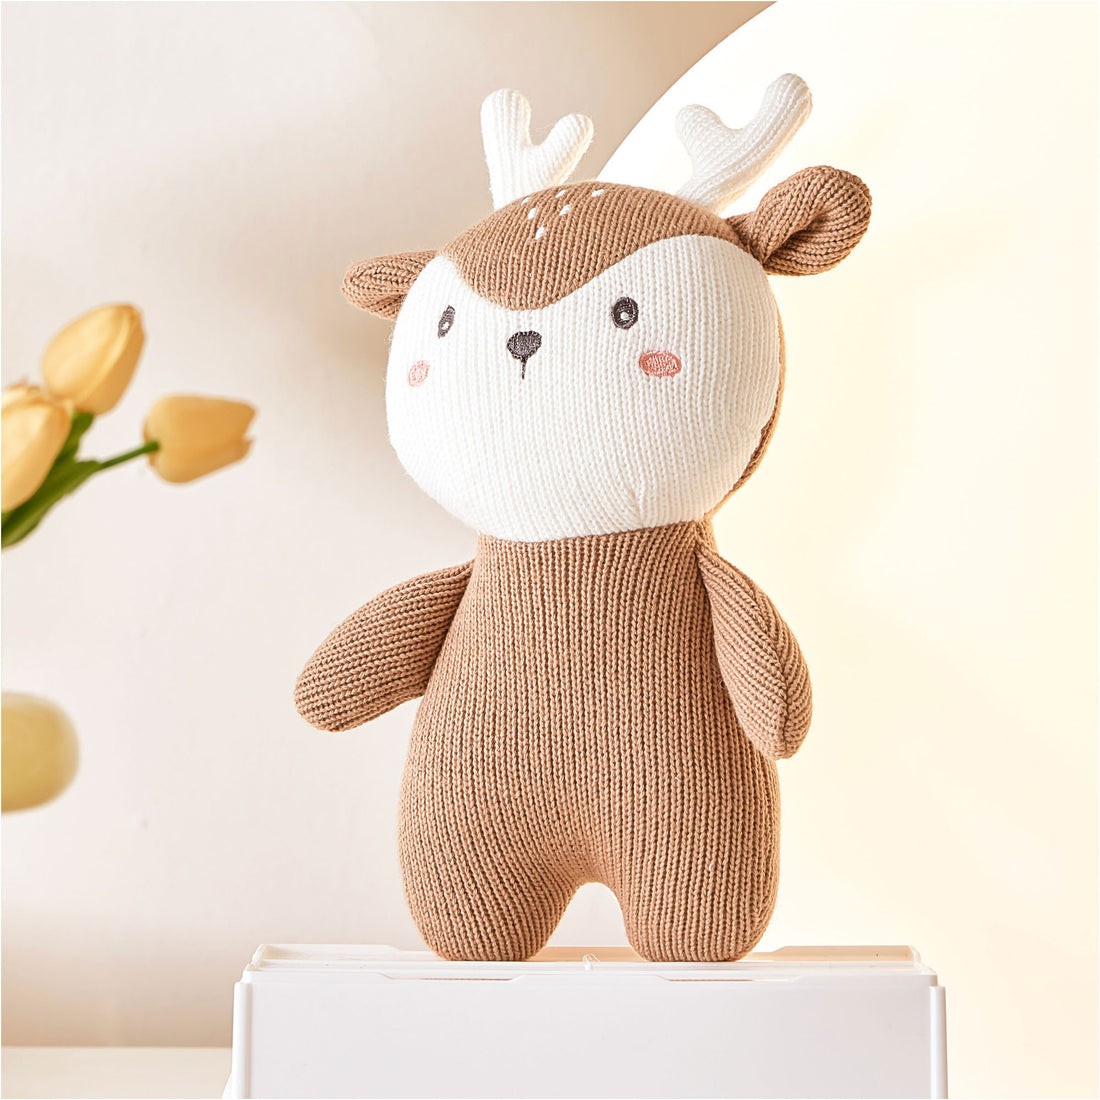 A close-up photo of a stuffed deer sitting on a white shelf. The deer is brown and white with floppy ears and a stitched smile. It has black button eyes and a pink pom-pom for a nose.